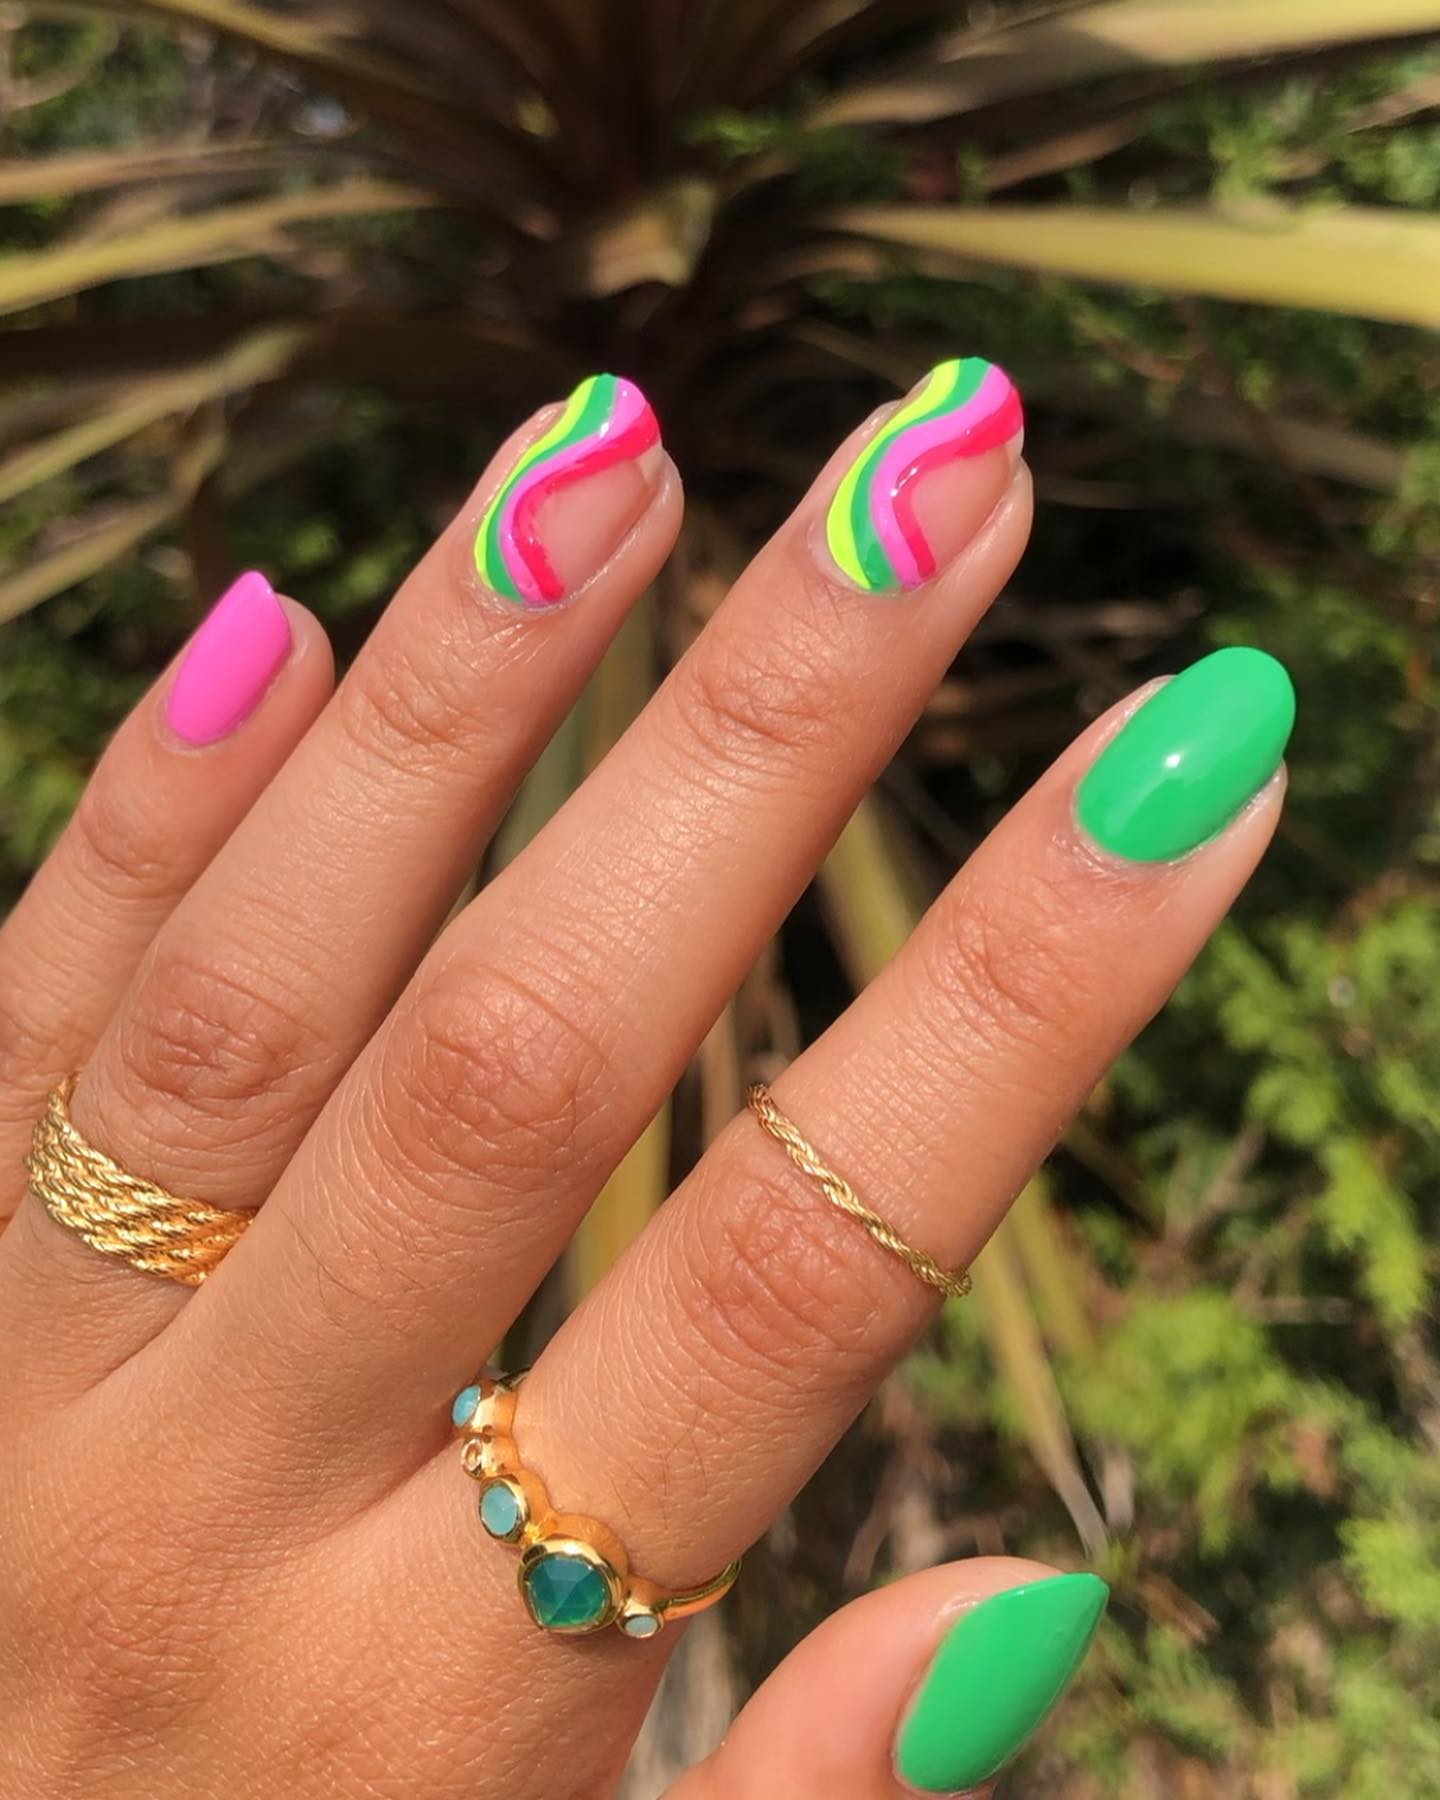 Not all of your nails should be full of swirls. You can have swirls as your accent nails like the ones above. The colors are also so matching.